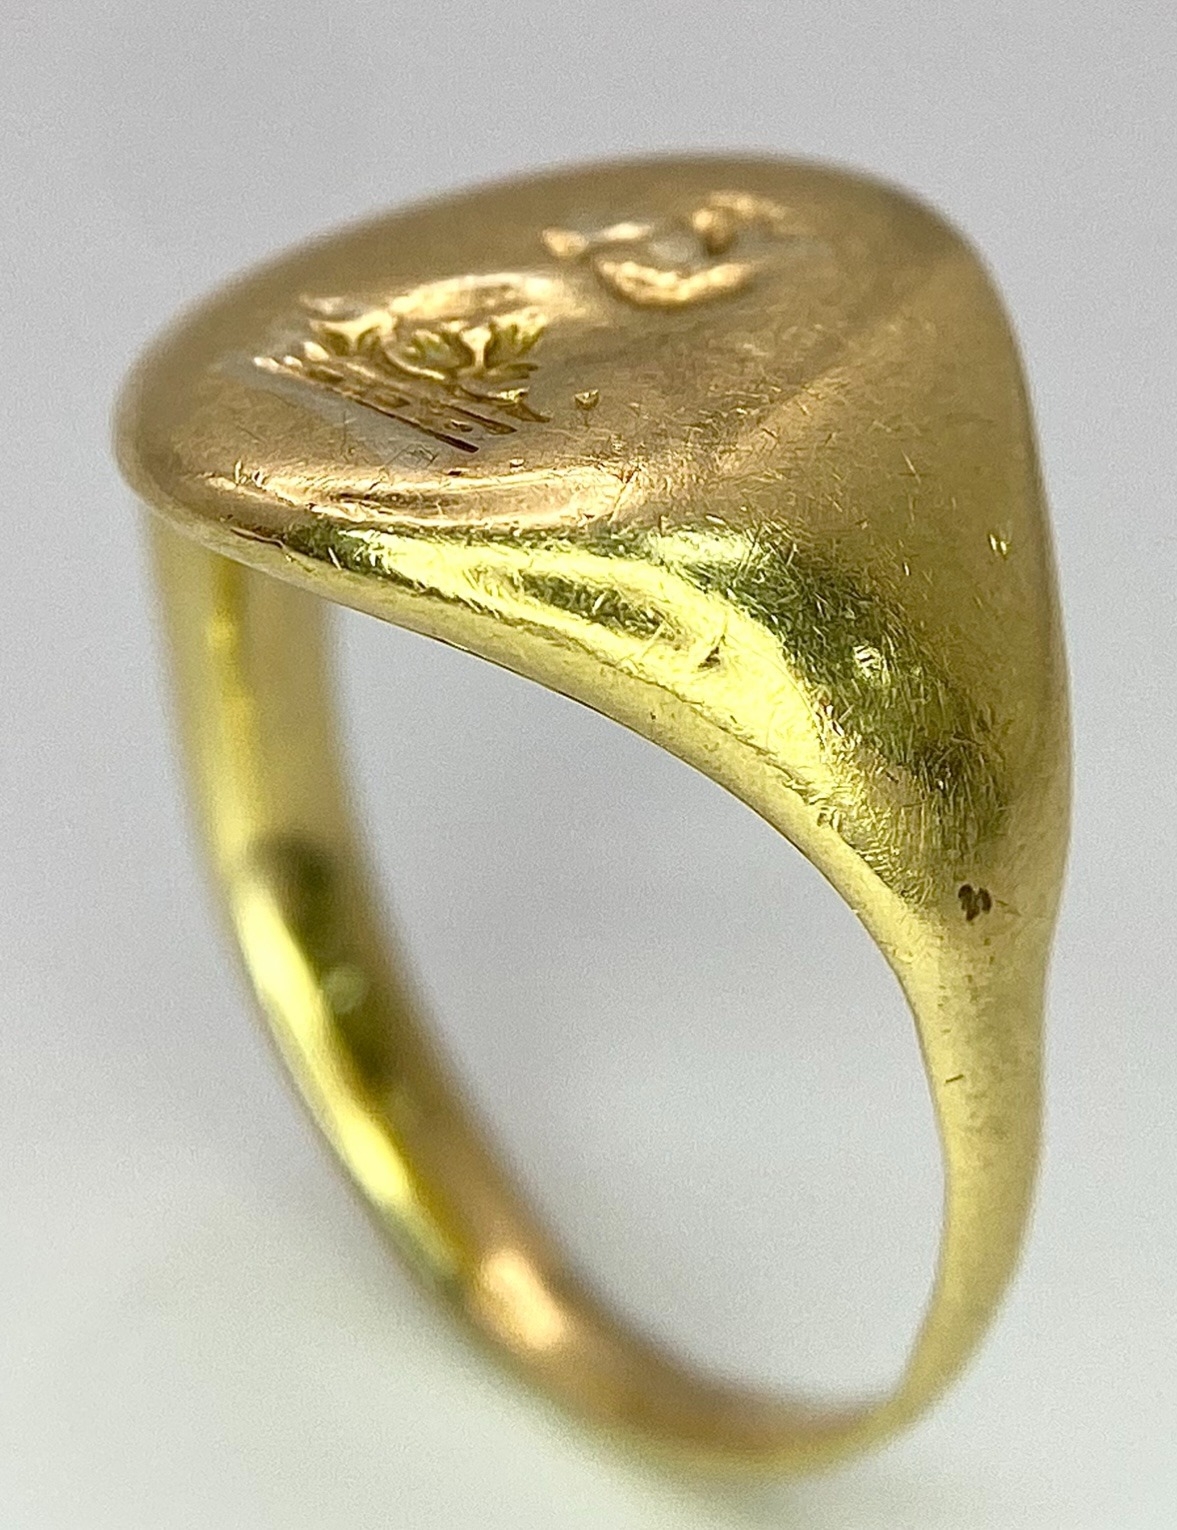 AN 18K YELLOW GOLD VINTAGE SEAL ENGRAVED SIGNET RING. Size K, 7.8g total weight. Ref: SC 8060 - Image 6 of 9